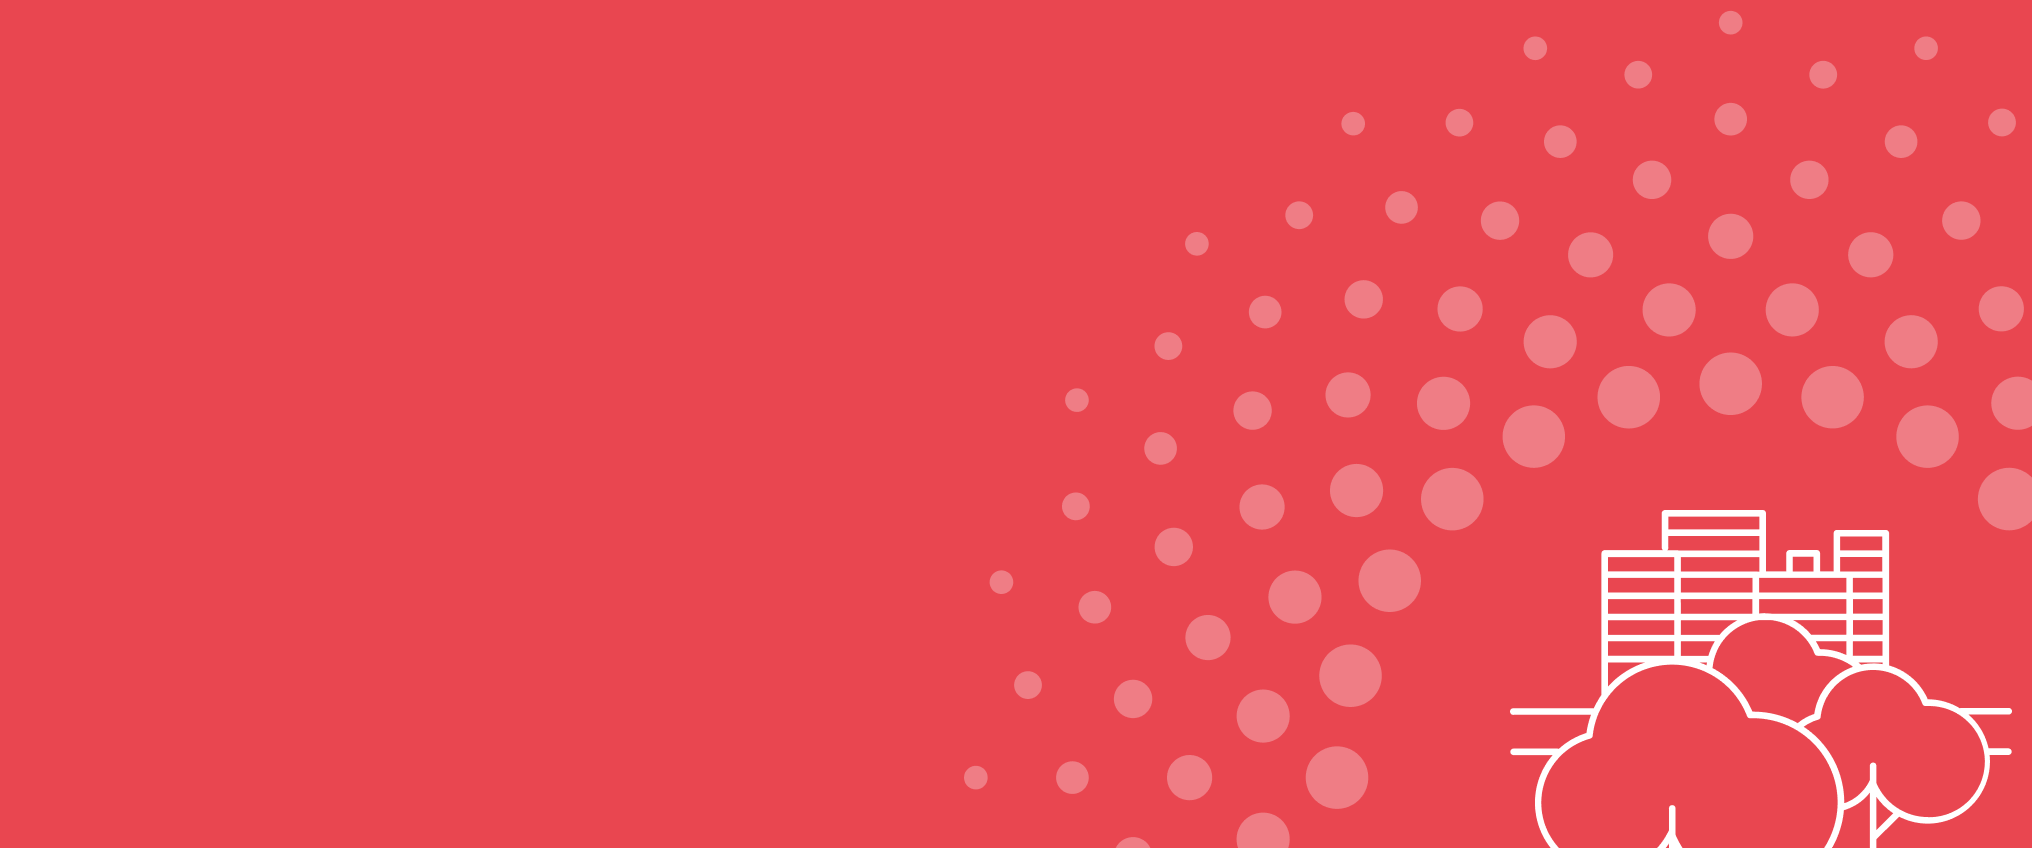 dots on red background